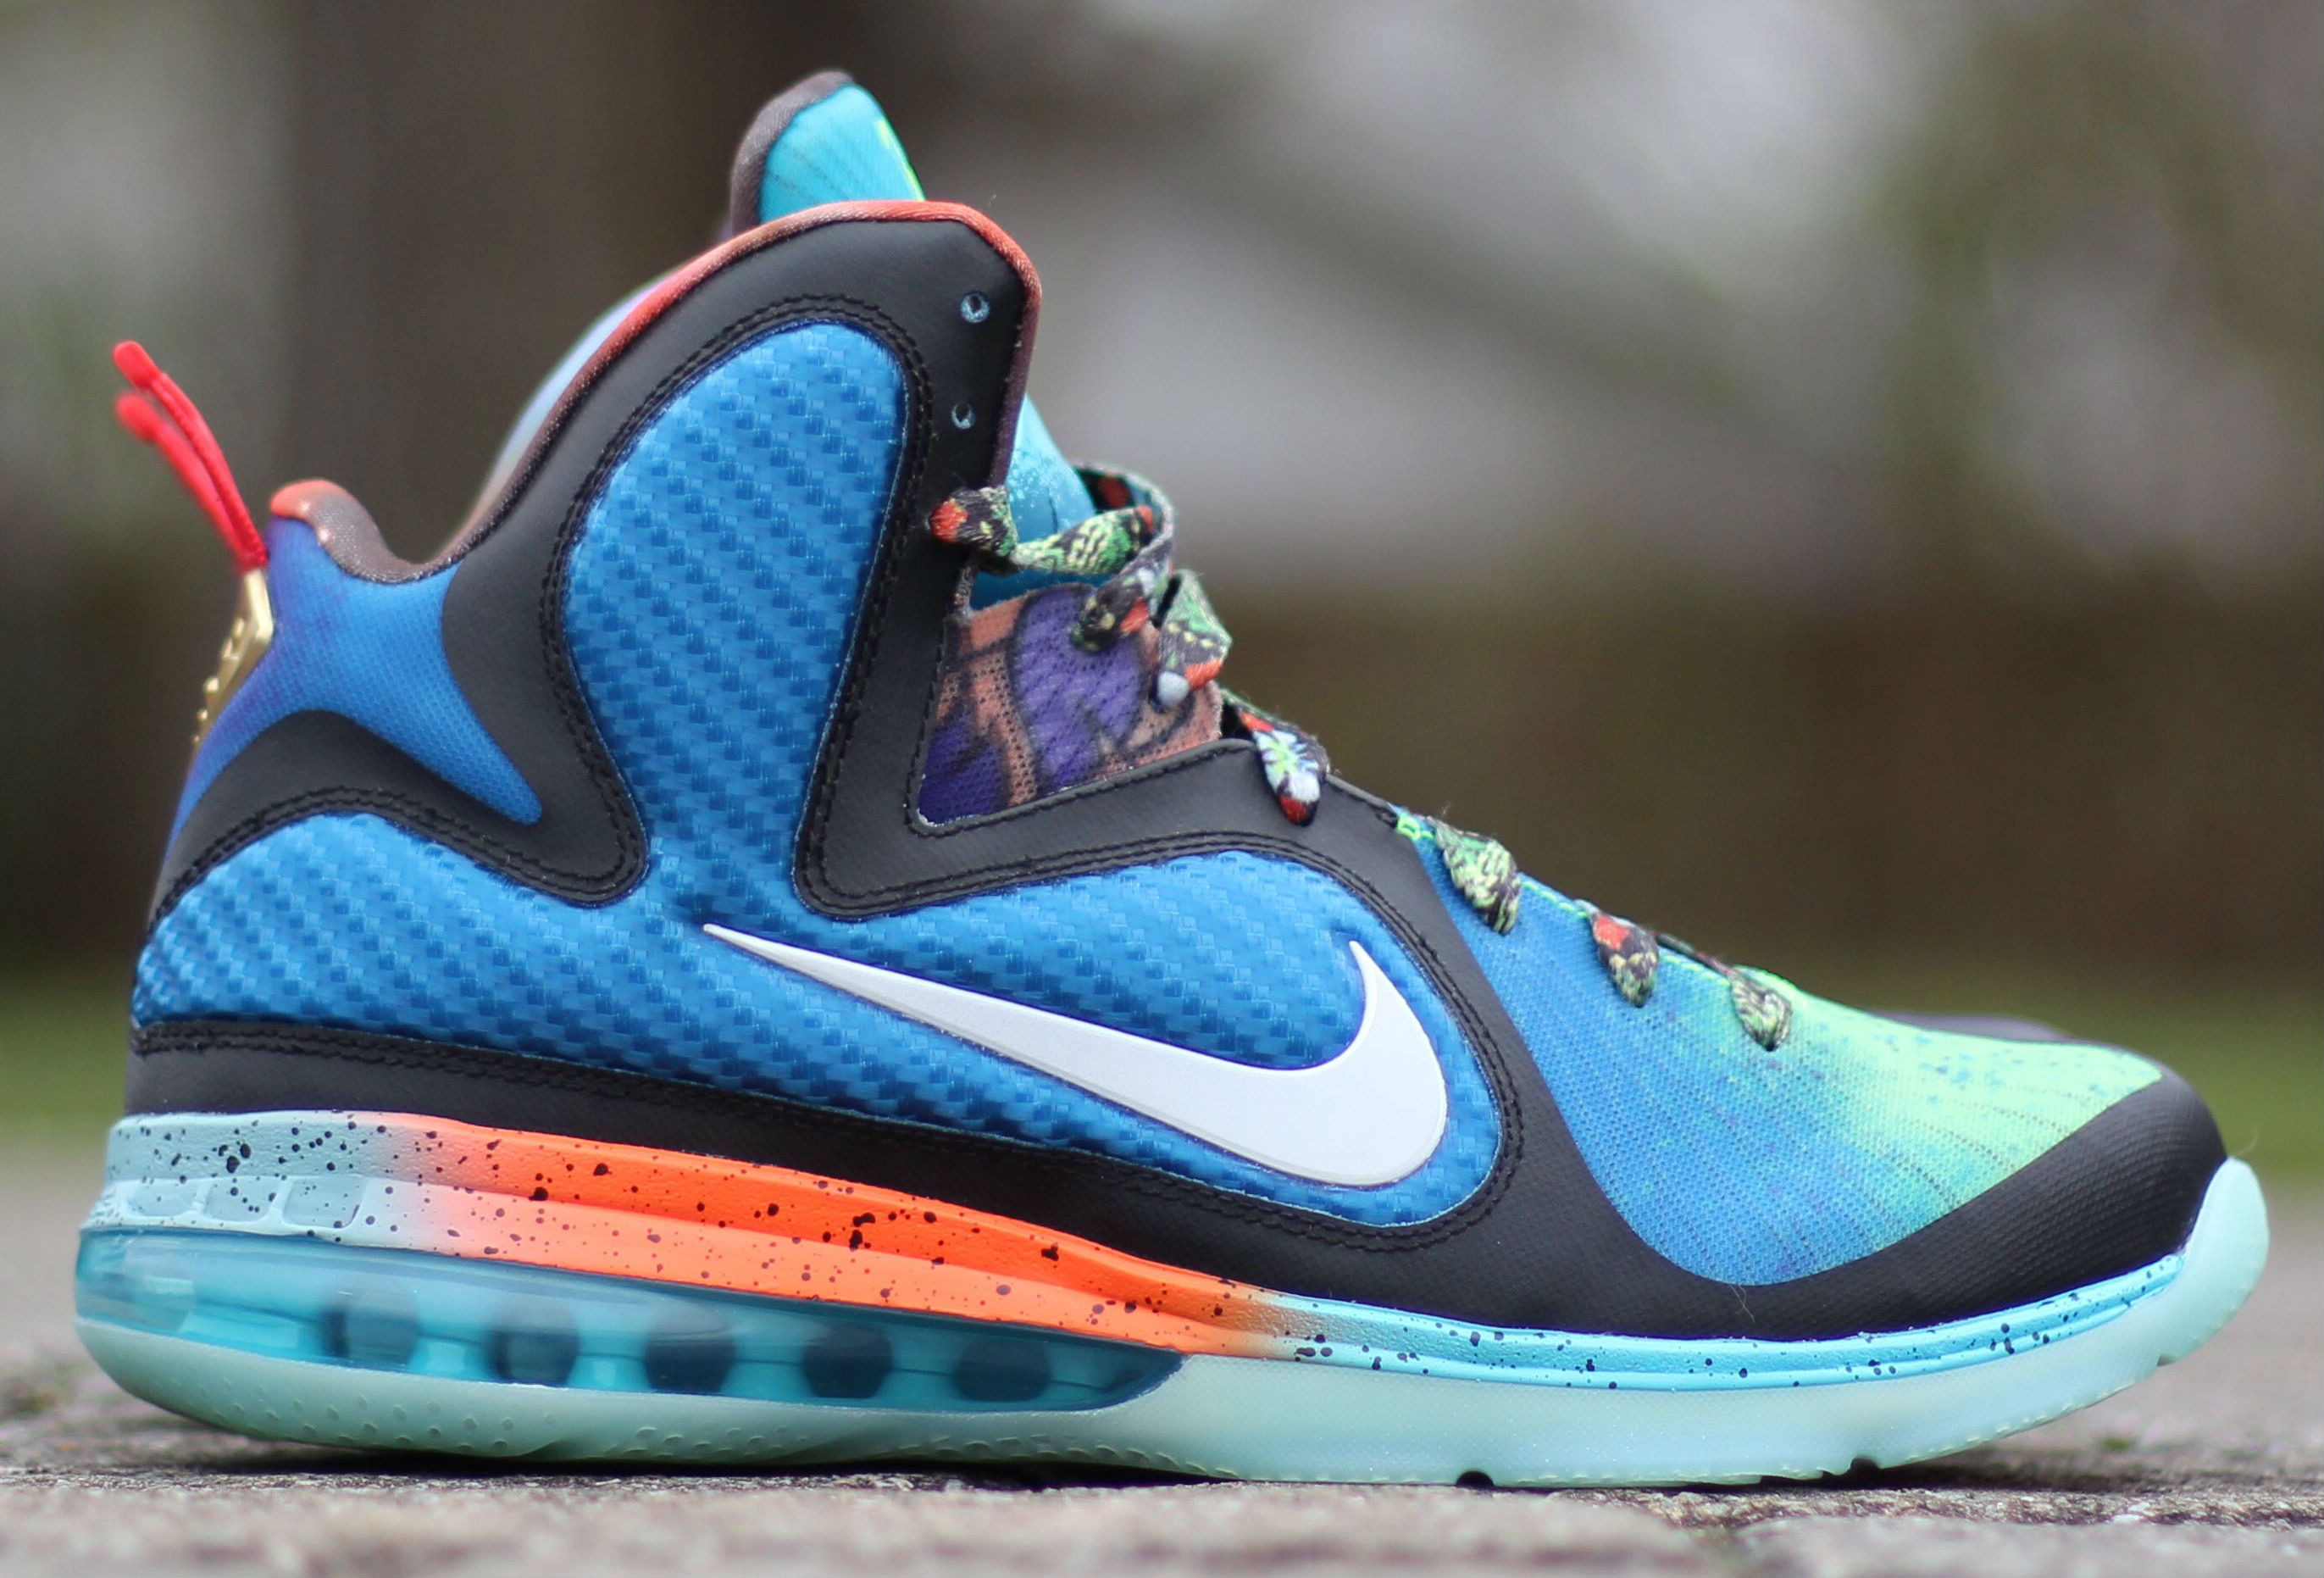 Nike LeBron 9 &quot;What The&quot; Sample (2012)